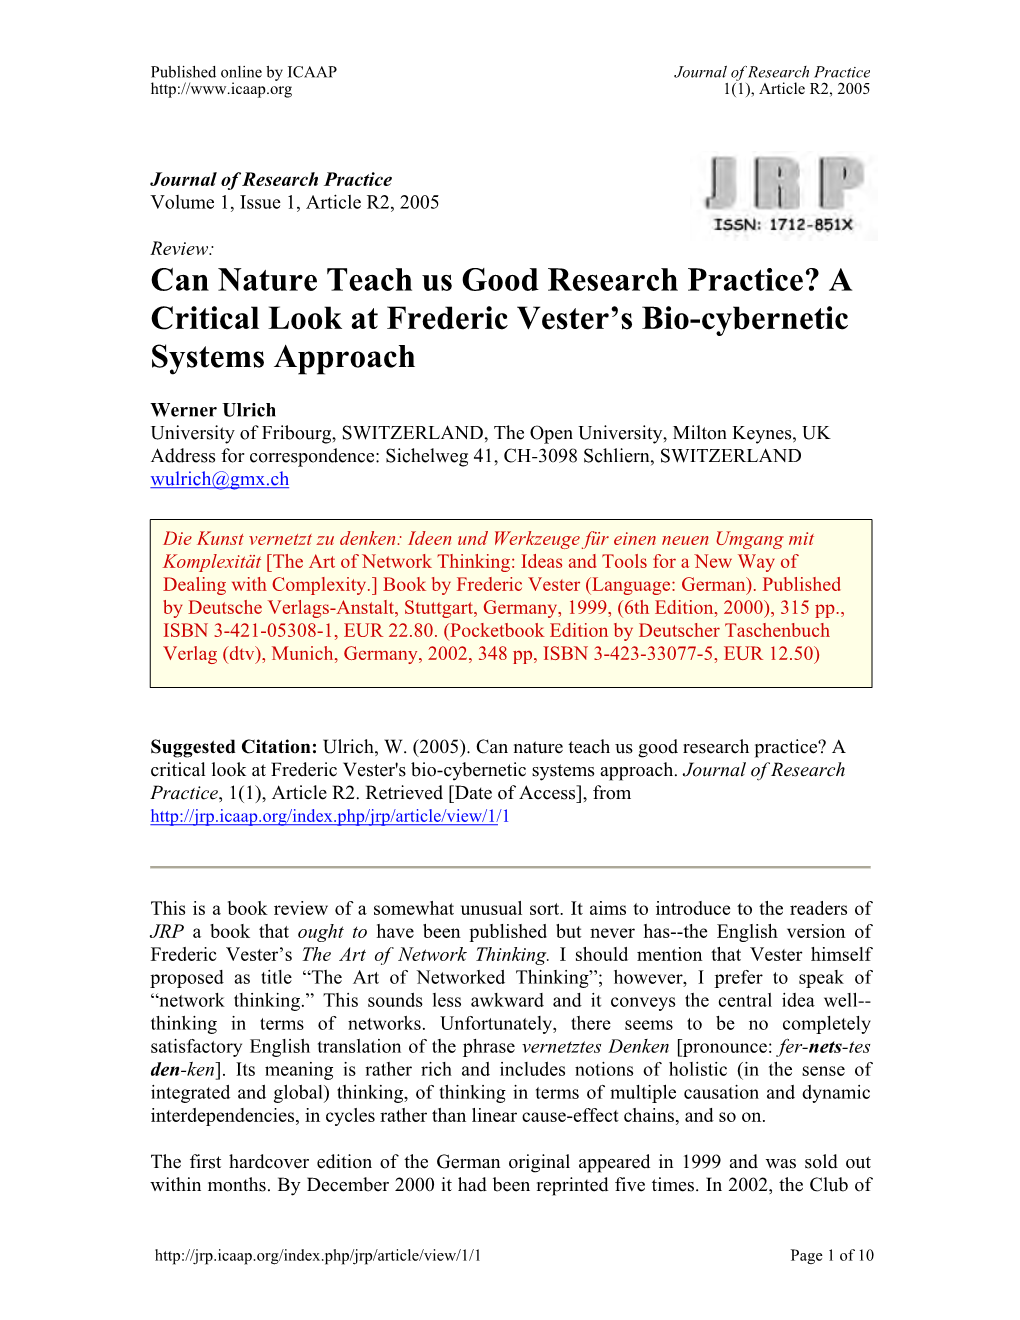 A Critical Look at Frederic Vester's Bio-Cybernetic Systems Approach